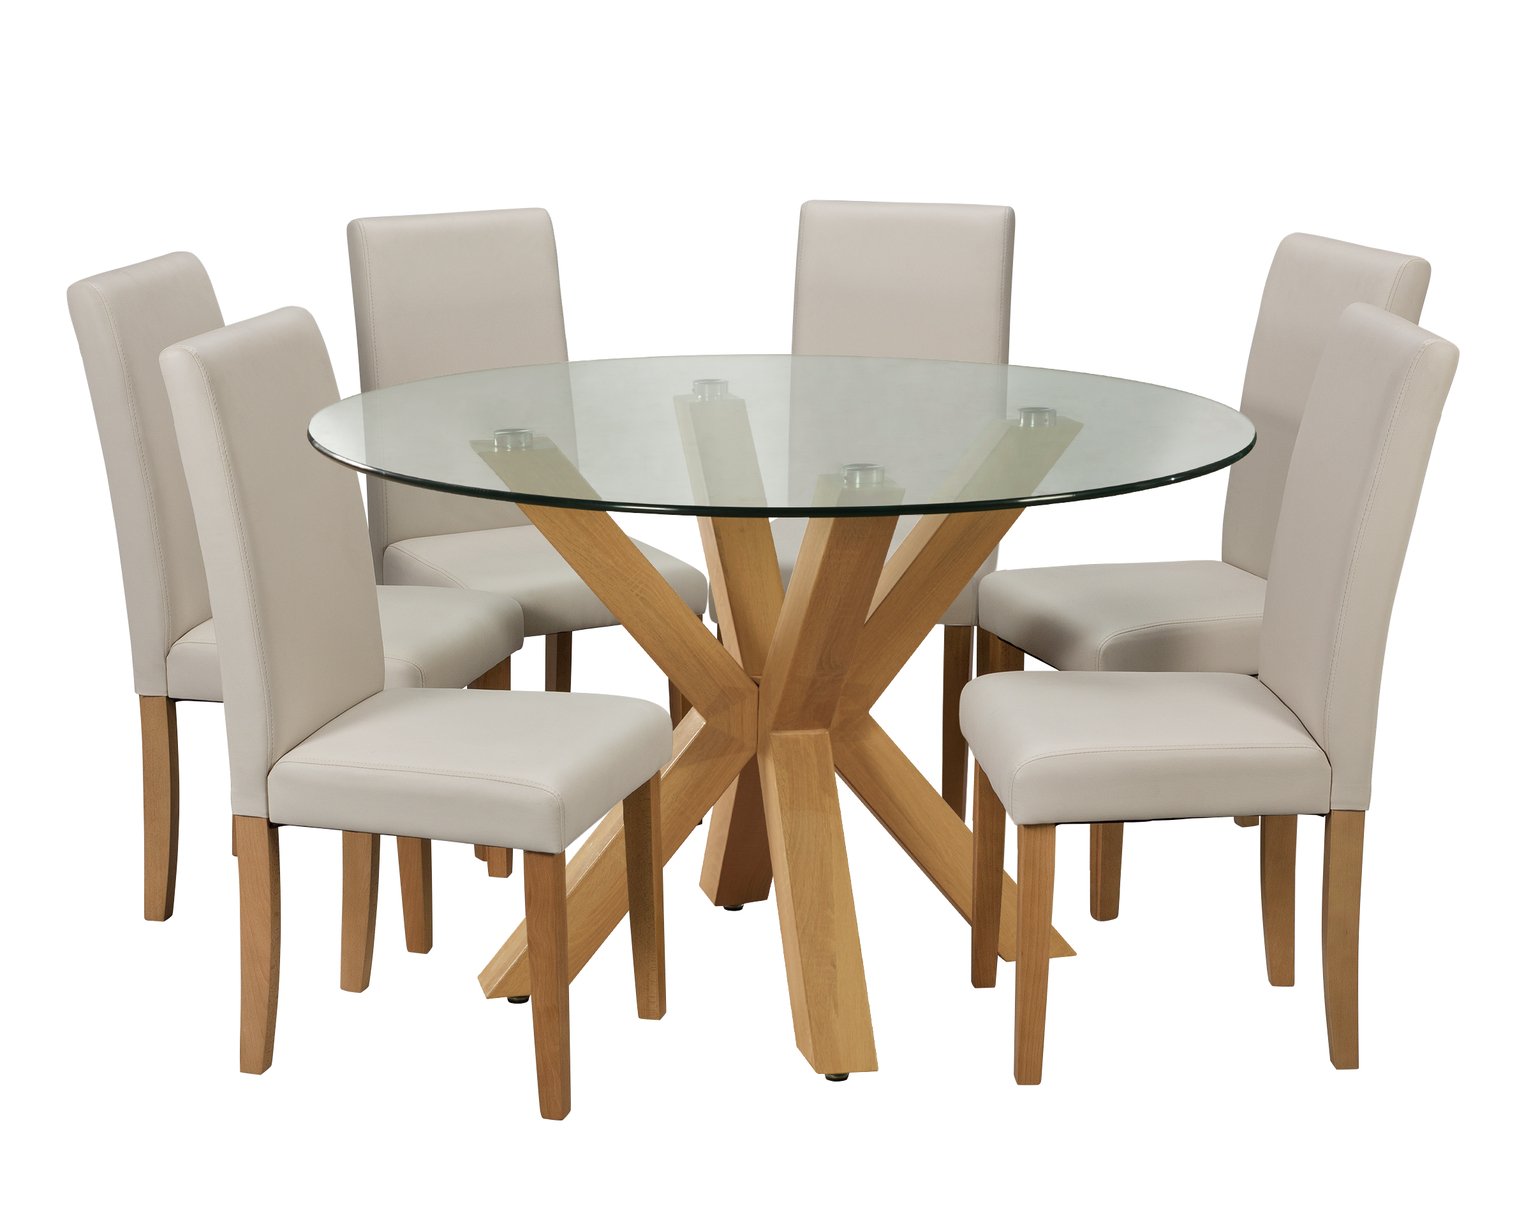 Argos Home Alden Glass Dining Table & 6 Cream Chairs